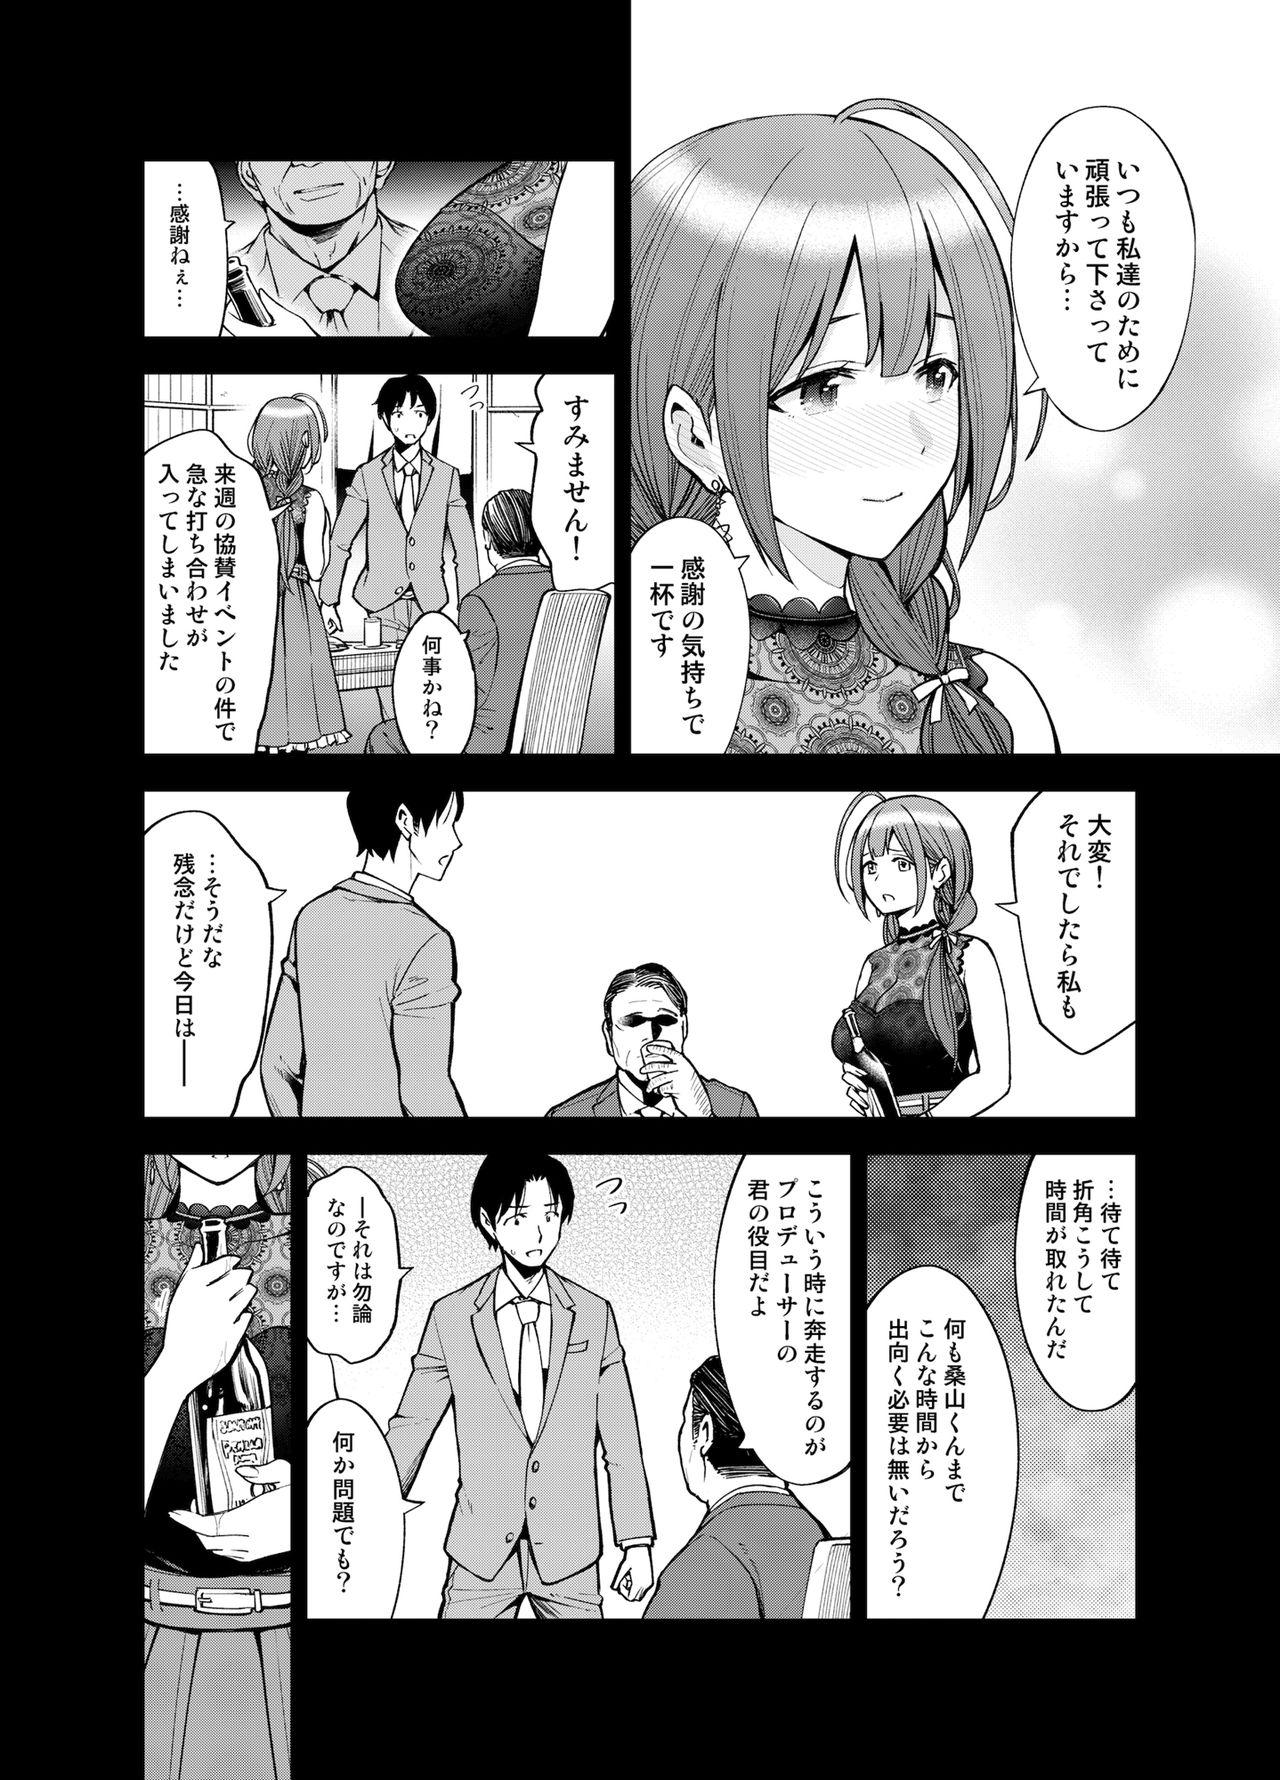 Mofos Night Blooming - The idolmaster Bedroom - Page 7